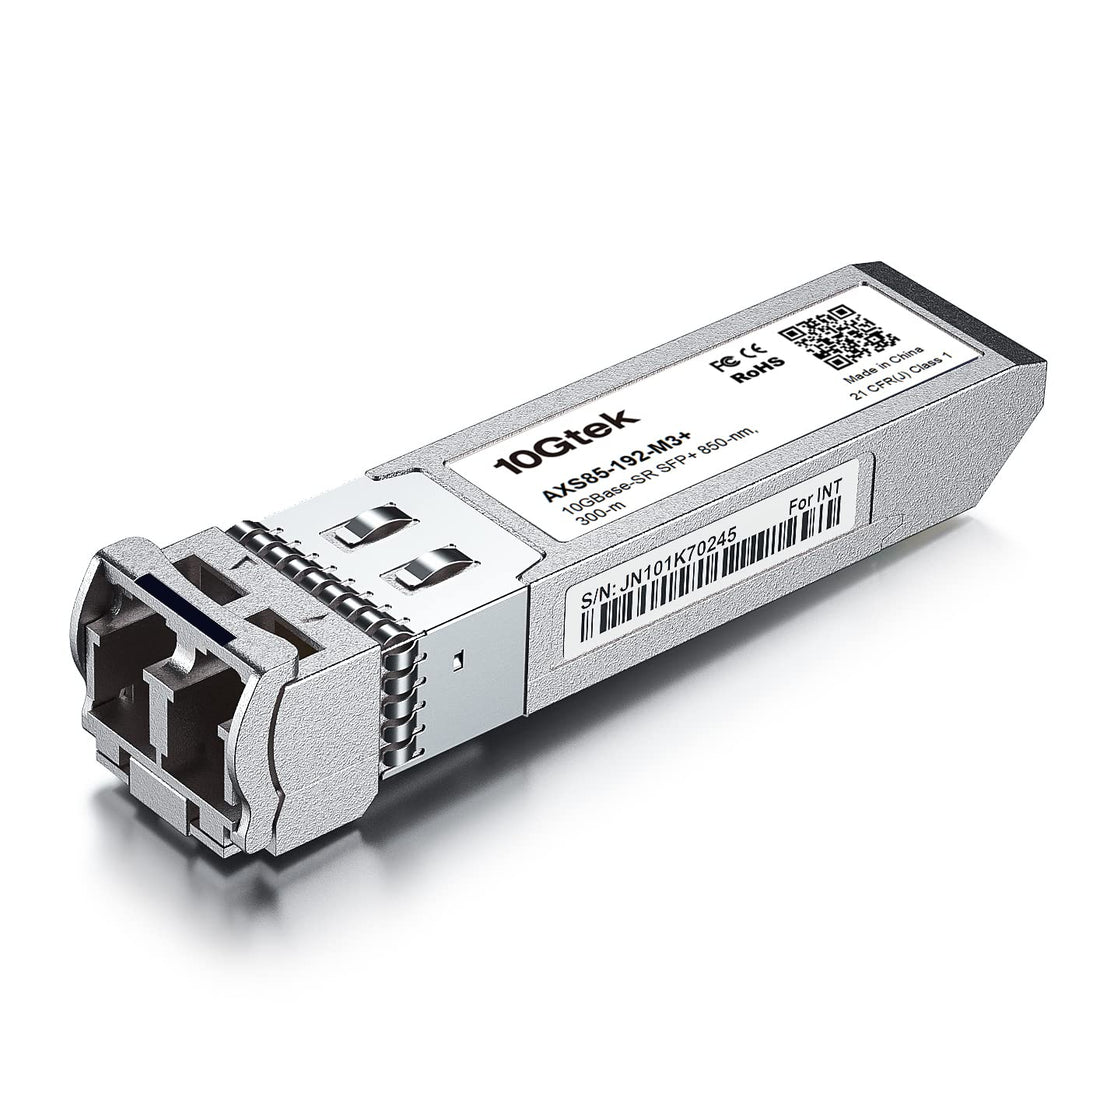 Industrial Grade 10GBase-SR SFP+ Transceiver, 10G 850nm MMF, up to 300 Meters, Compatible with Cisco SFP-10G-SR, Meraki MA-SFP-10GB-SR, Ubiquiti UniFi UF-MM-10G, Fortinet, Mikrotik, Netgear and More